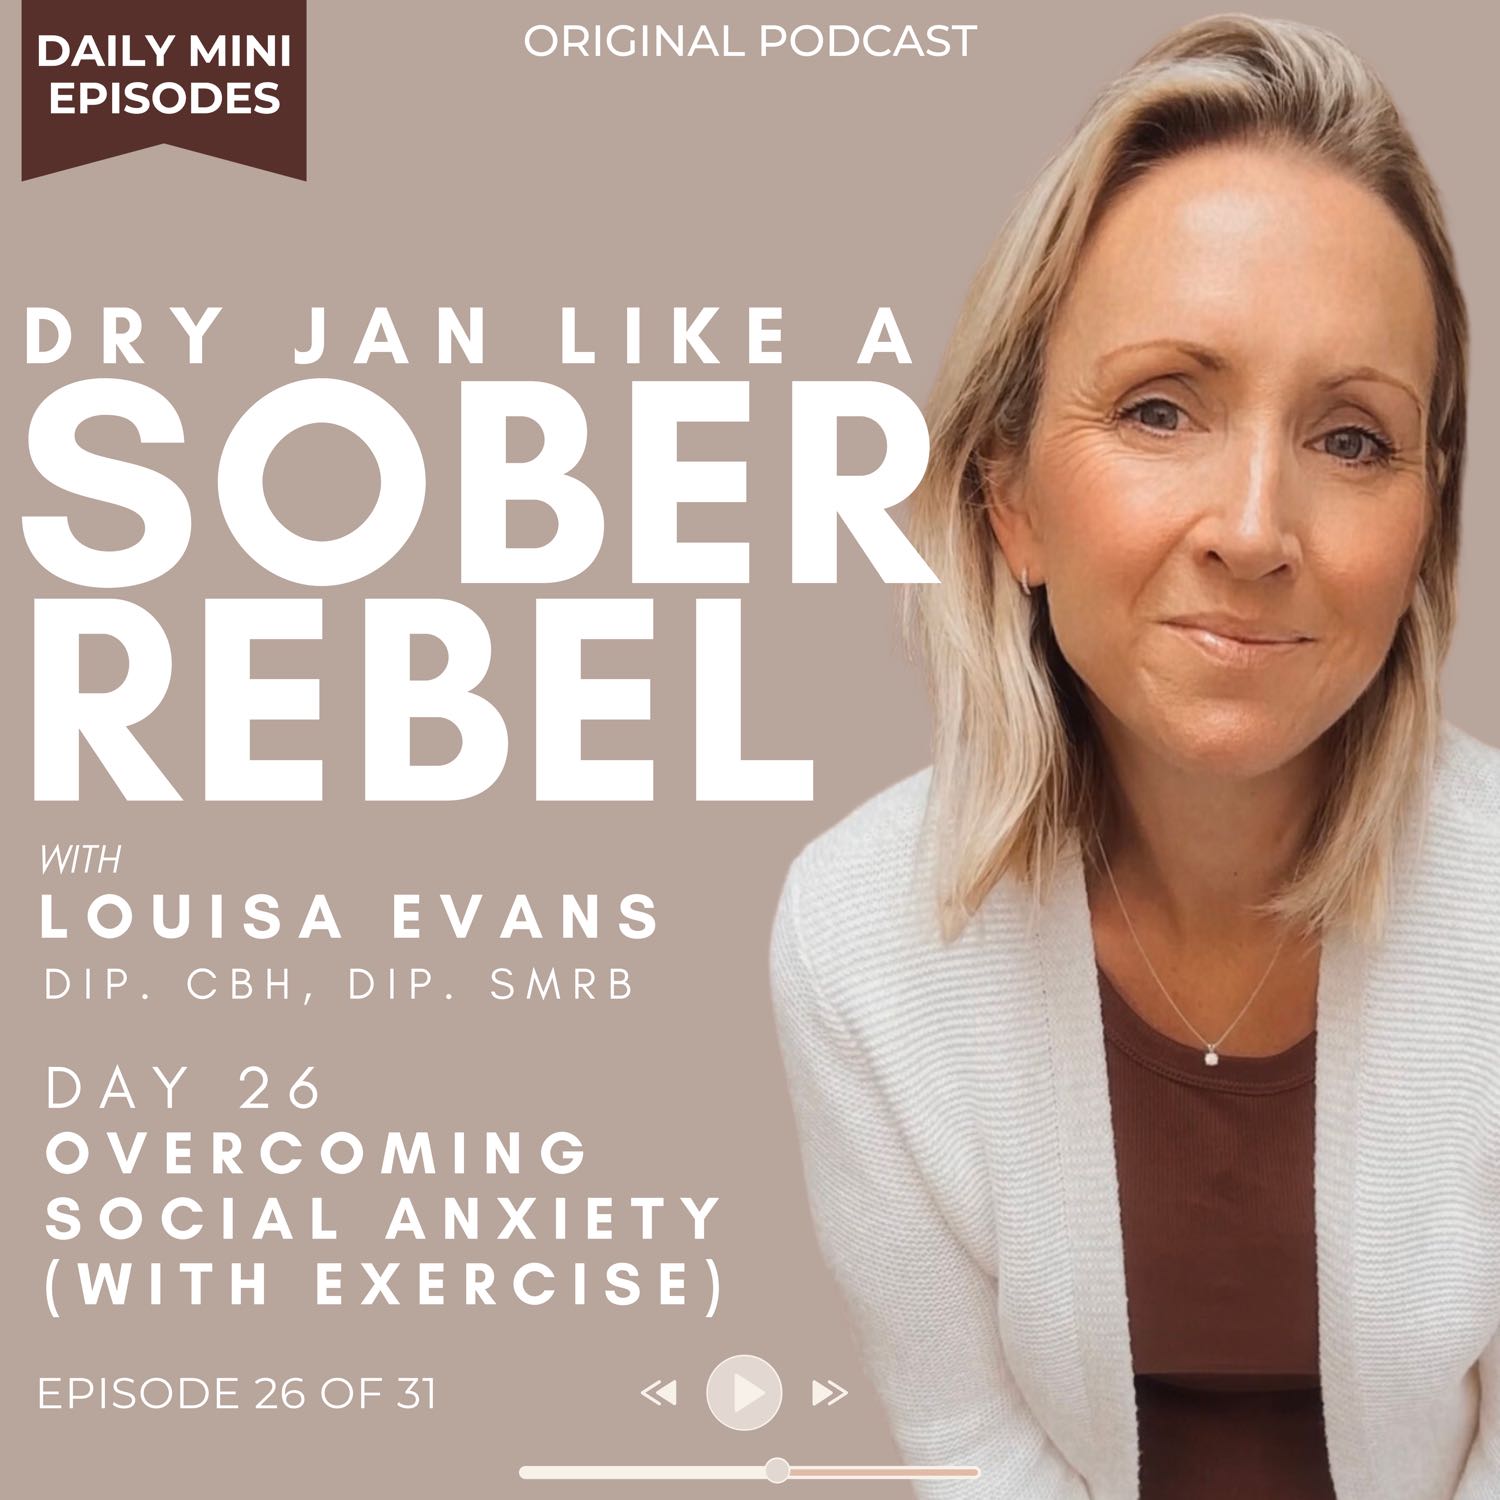 Dry Jan like a Sober Rebel | Overcoming social anxiety (with exercise) | Day 26